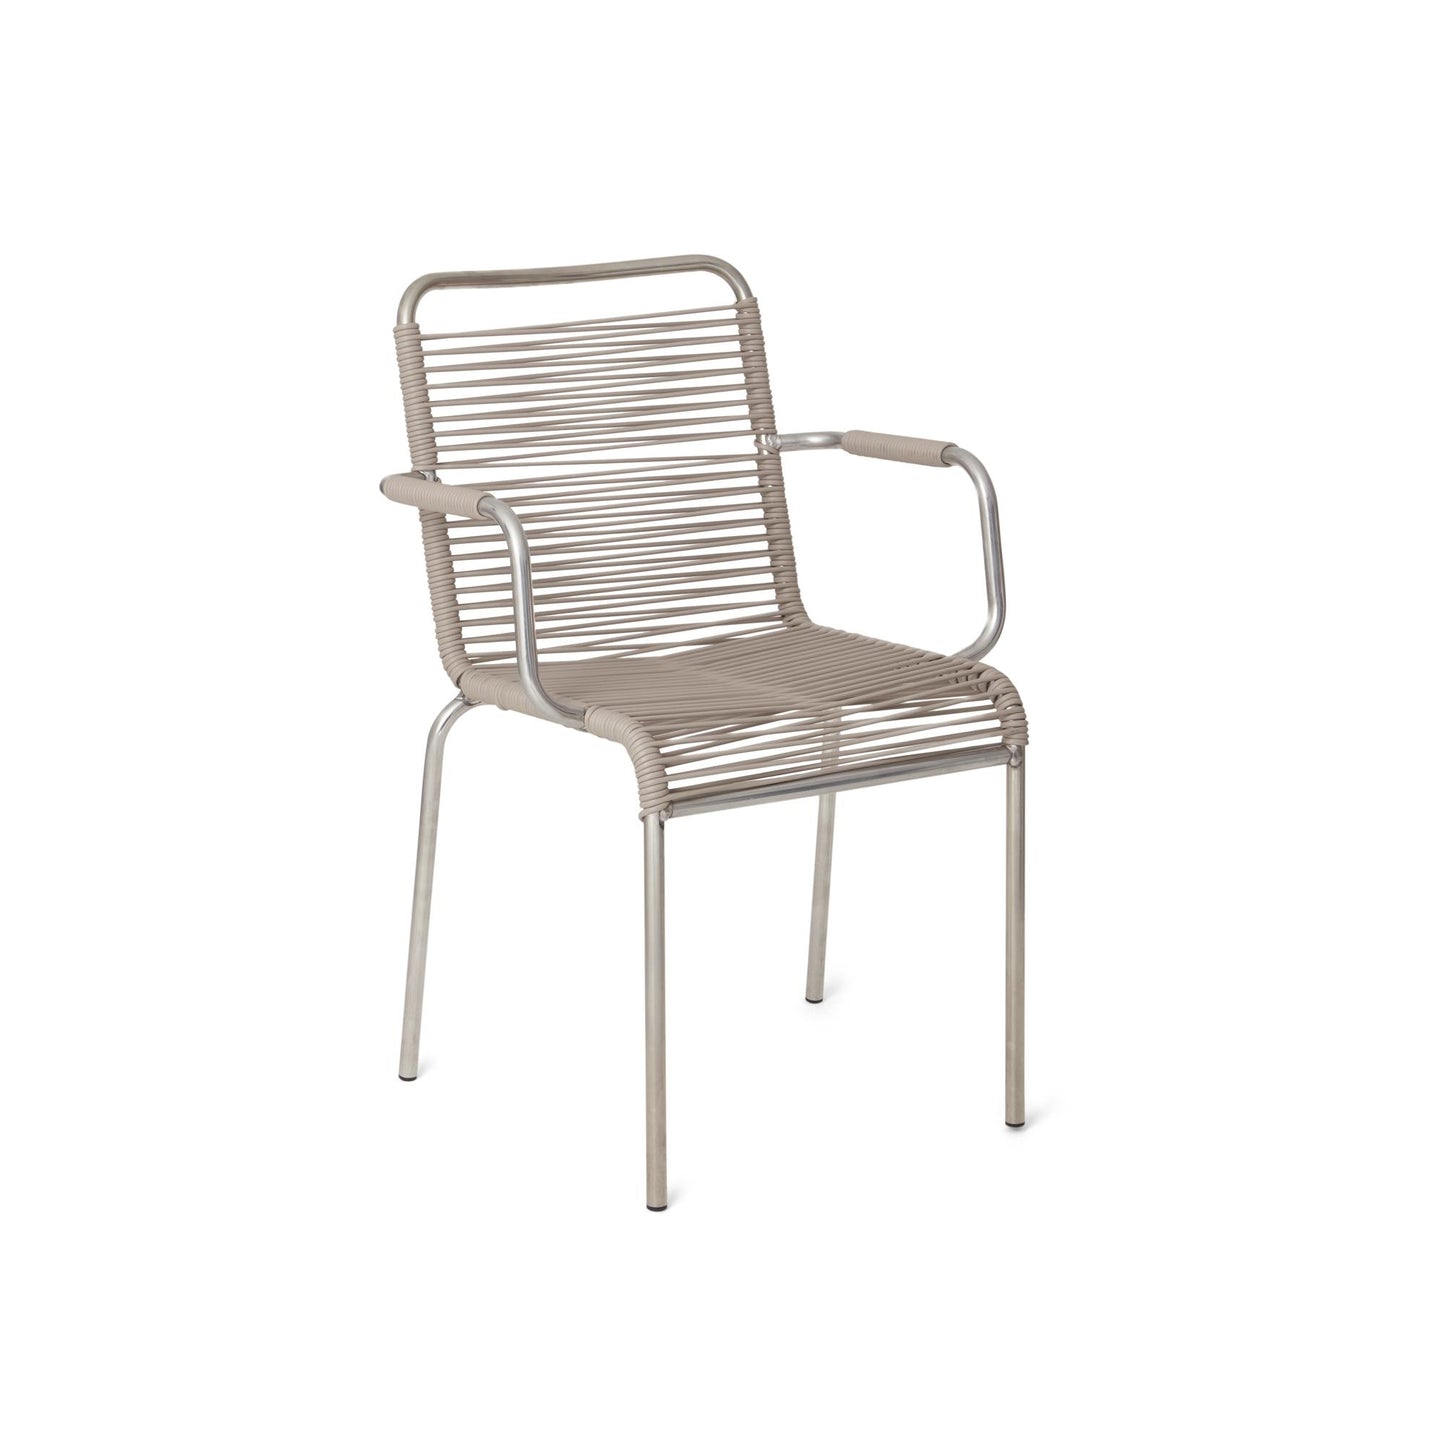 Mya Spaghetti Dining Chair with Armrests by Fiam #Taupe